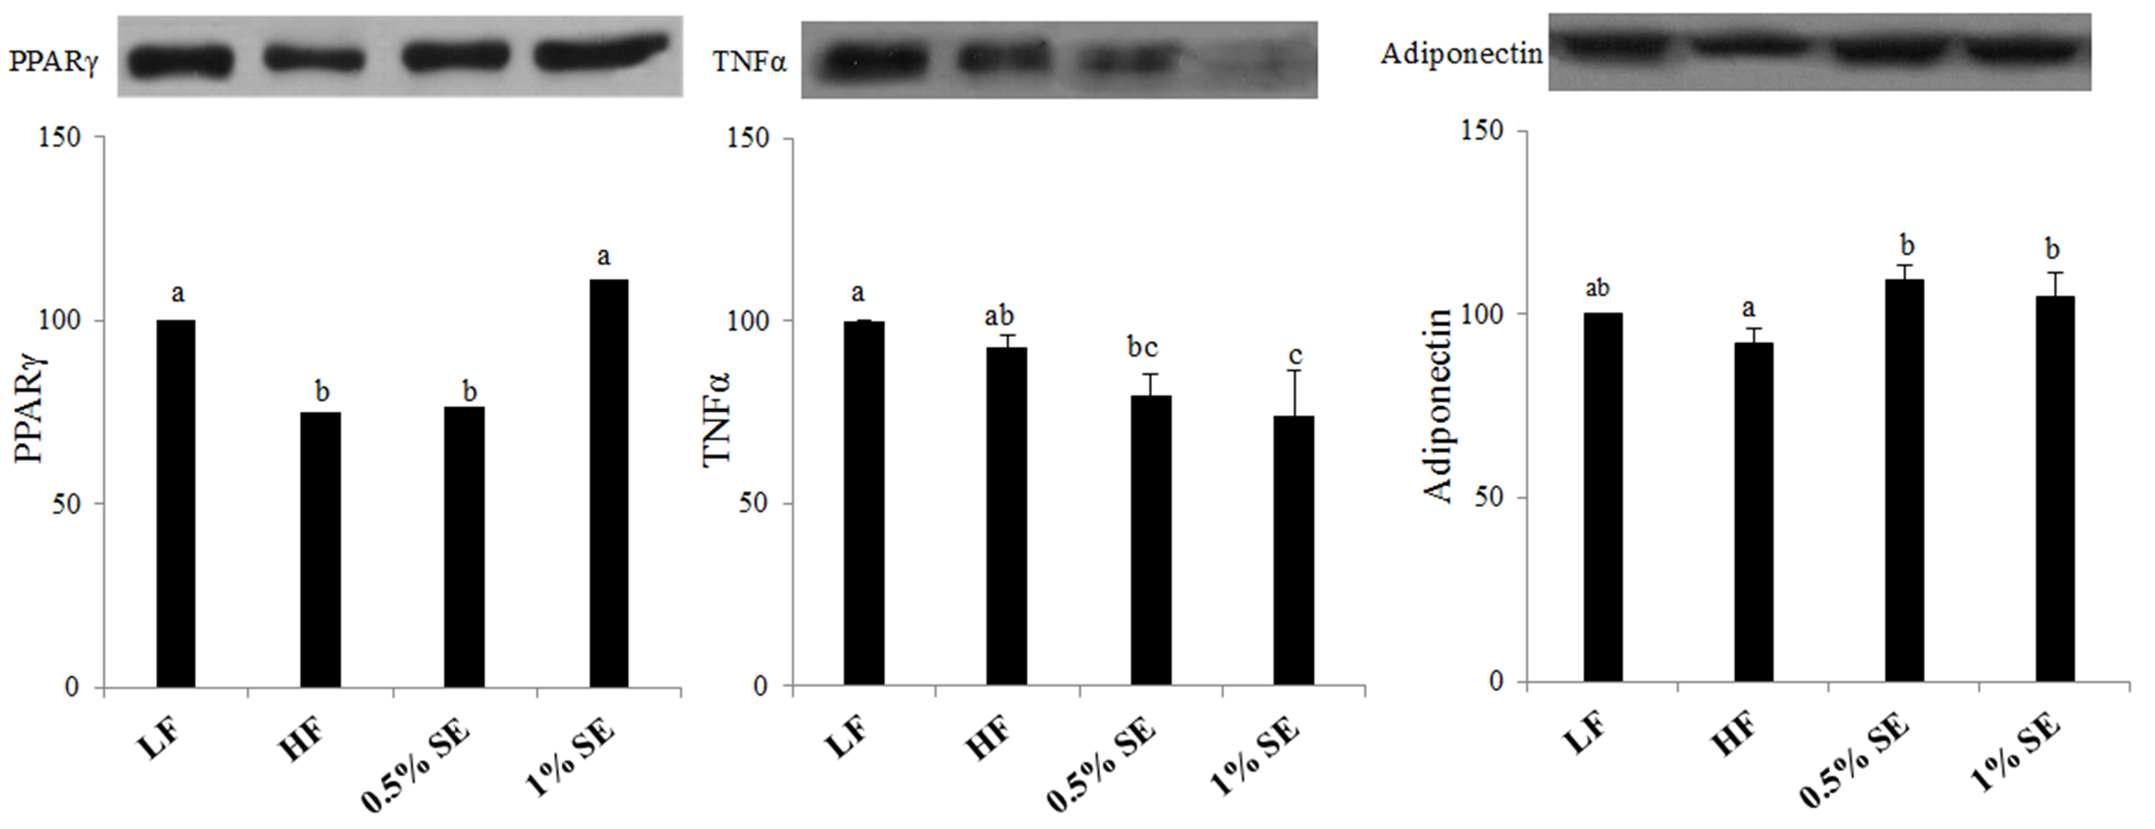 Effect of sorghum extracts on protein expression of PPAR-γ TNF-α and adiponectin in adipose tissue.